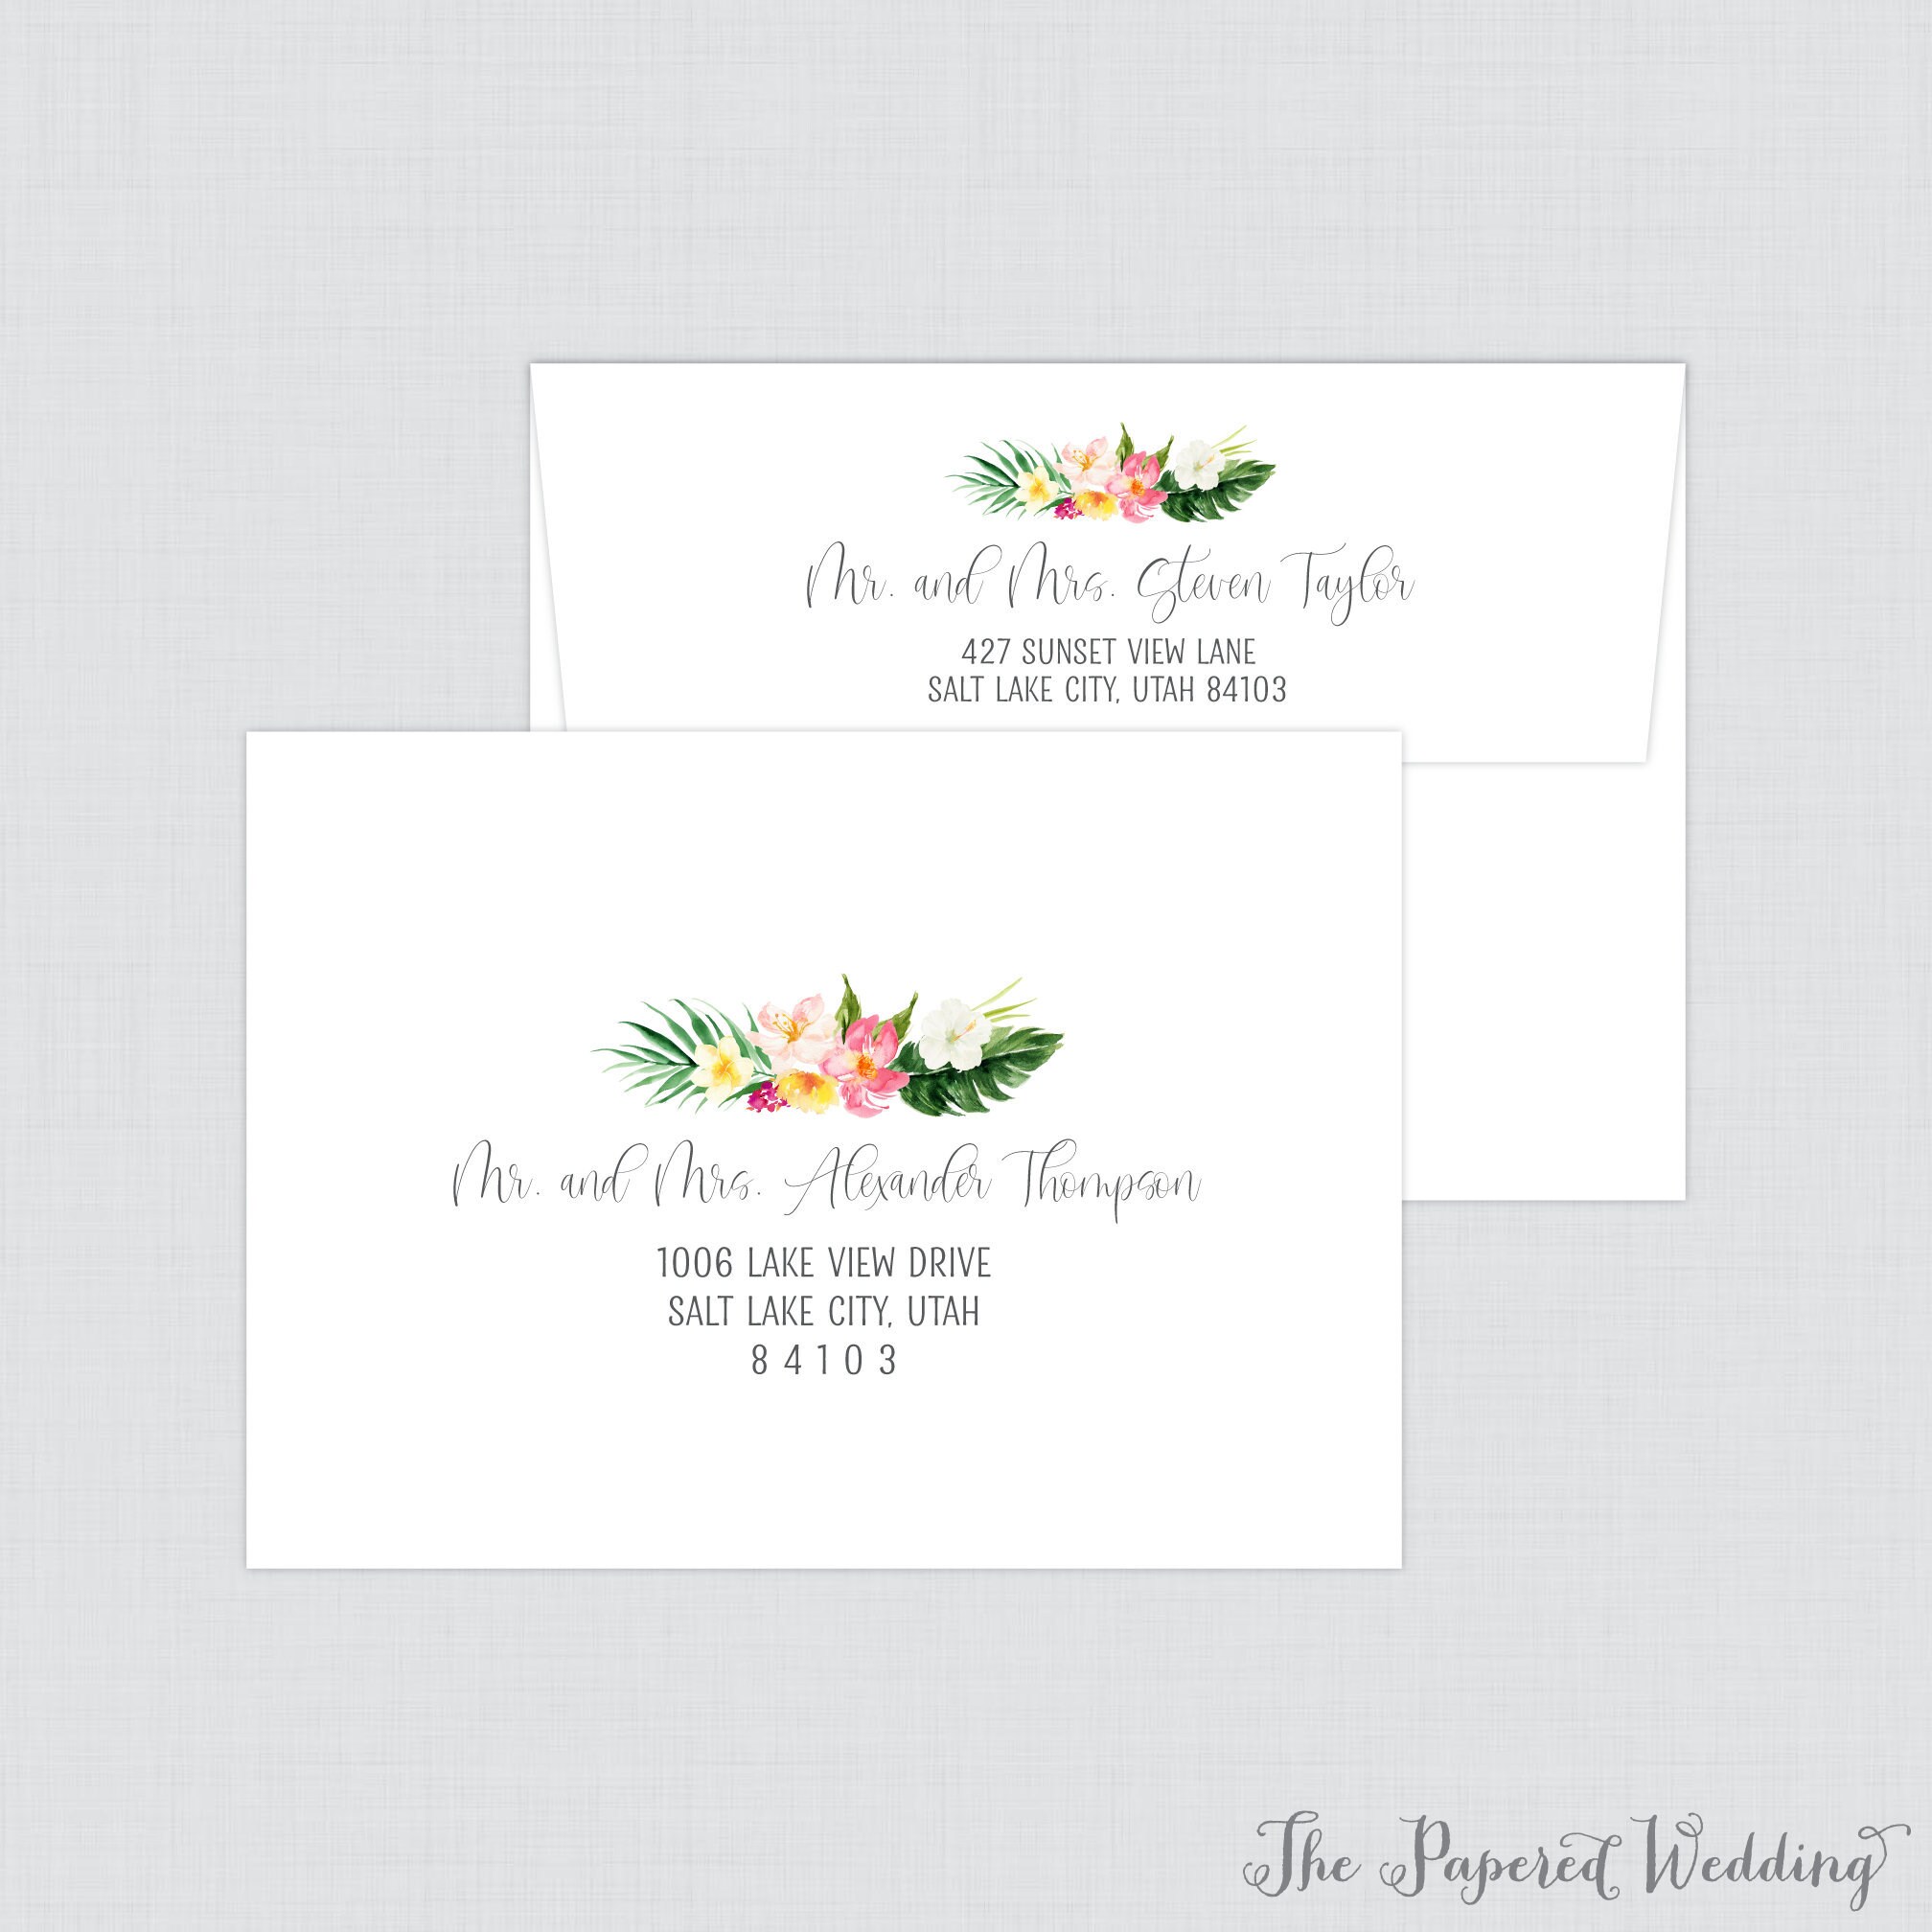 Printed Envelopes With Tropical Flowers - Hawaiian Floral & Palm Leaf Wedding Envelopes, Hibiscus Custom Guest Addresses Recipient 0030